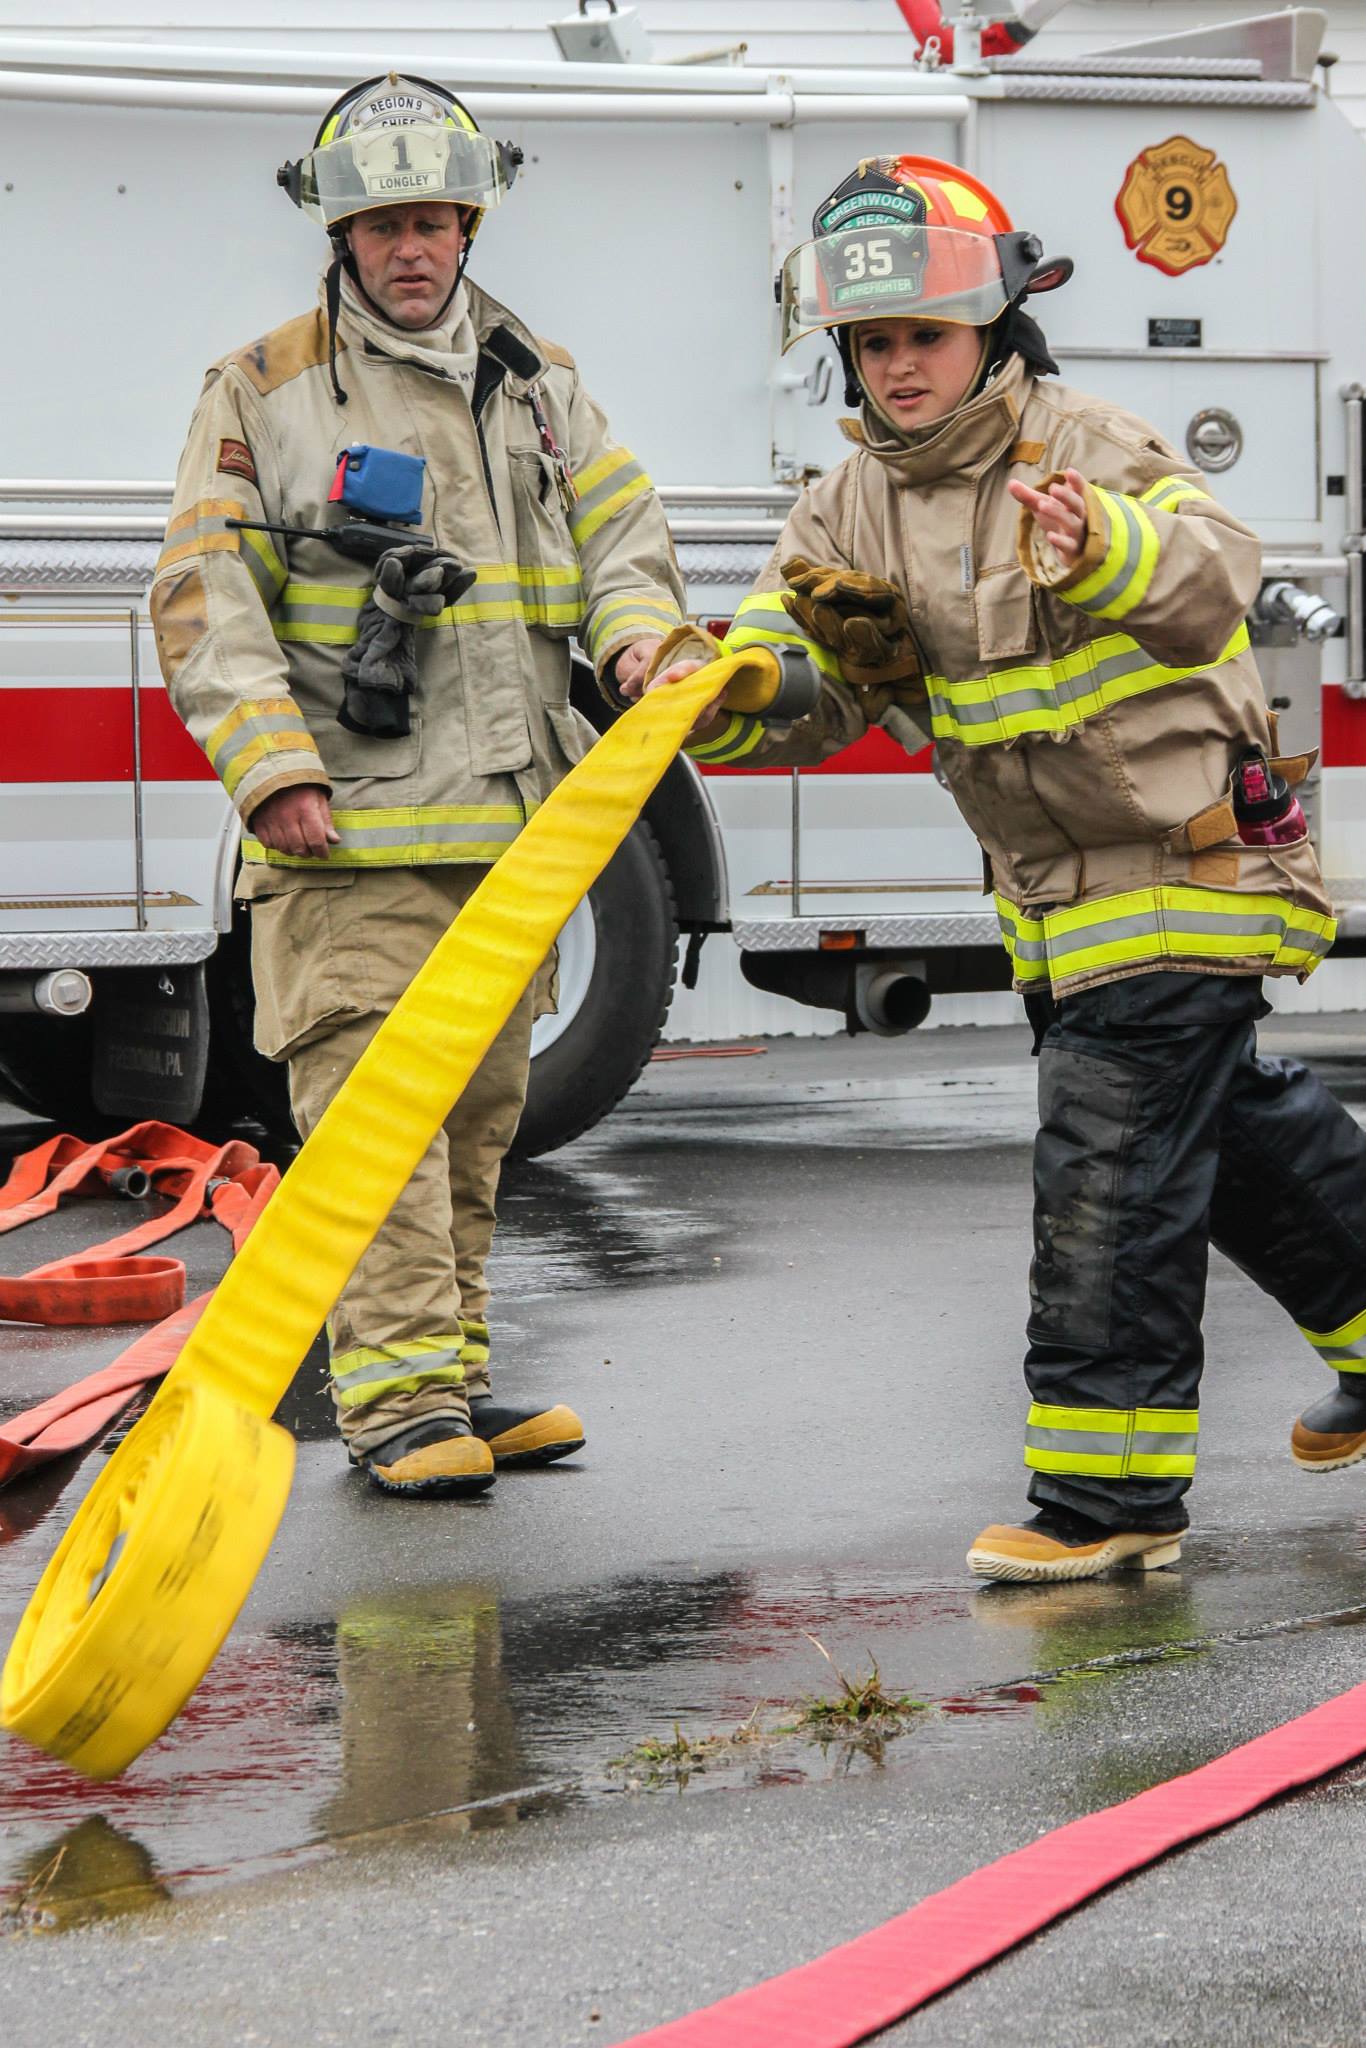 Student practices unrolling fire hose